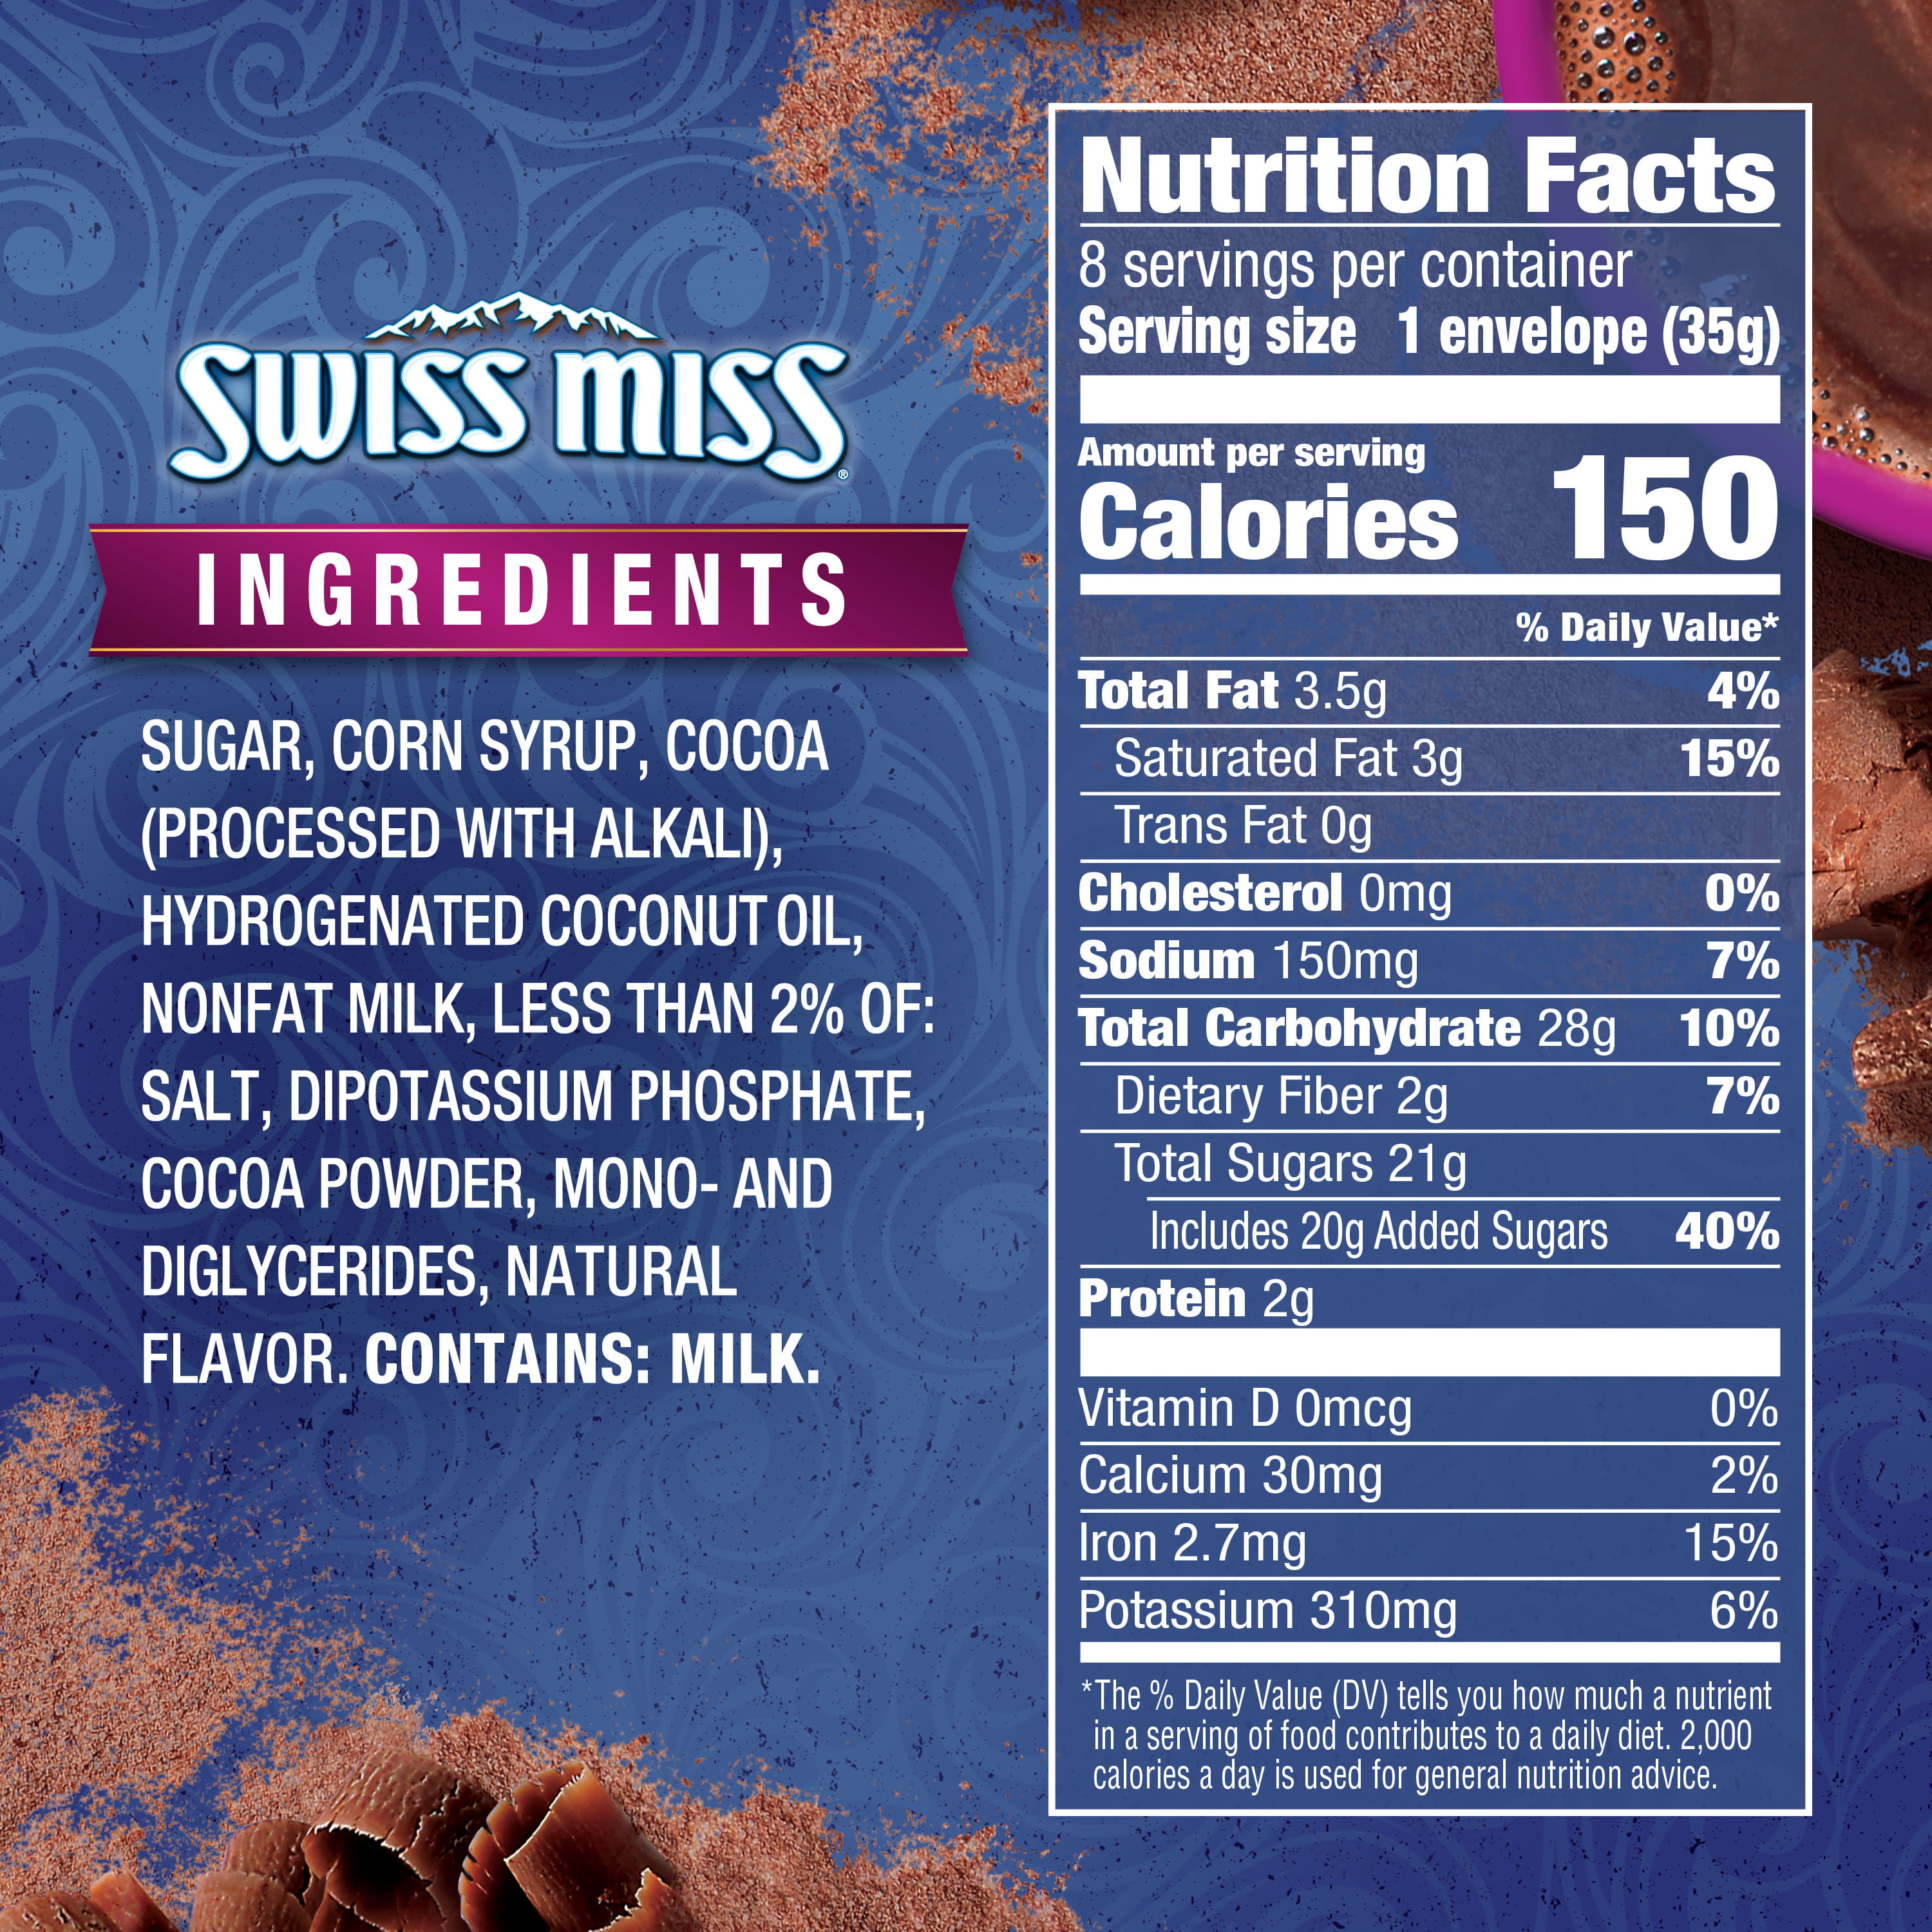 How many calories in swiss miss sugar free hot chocolate Swiss Miss Indulgent Collection Dark Chocolate Sensation Hot Cocoa Mix Packets 8 Count Walmart Com Walmart Com